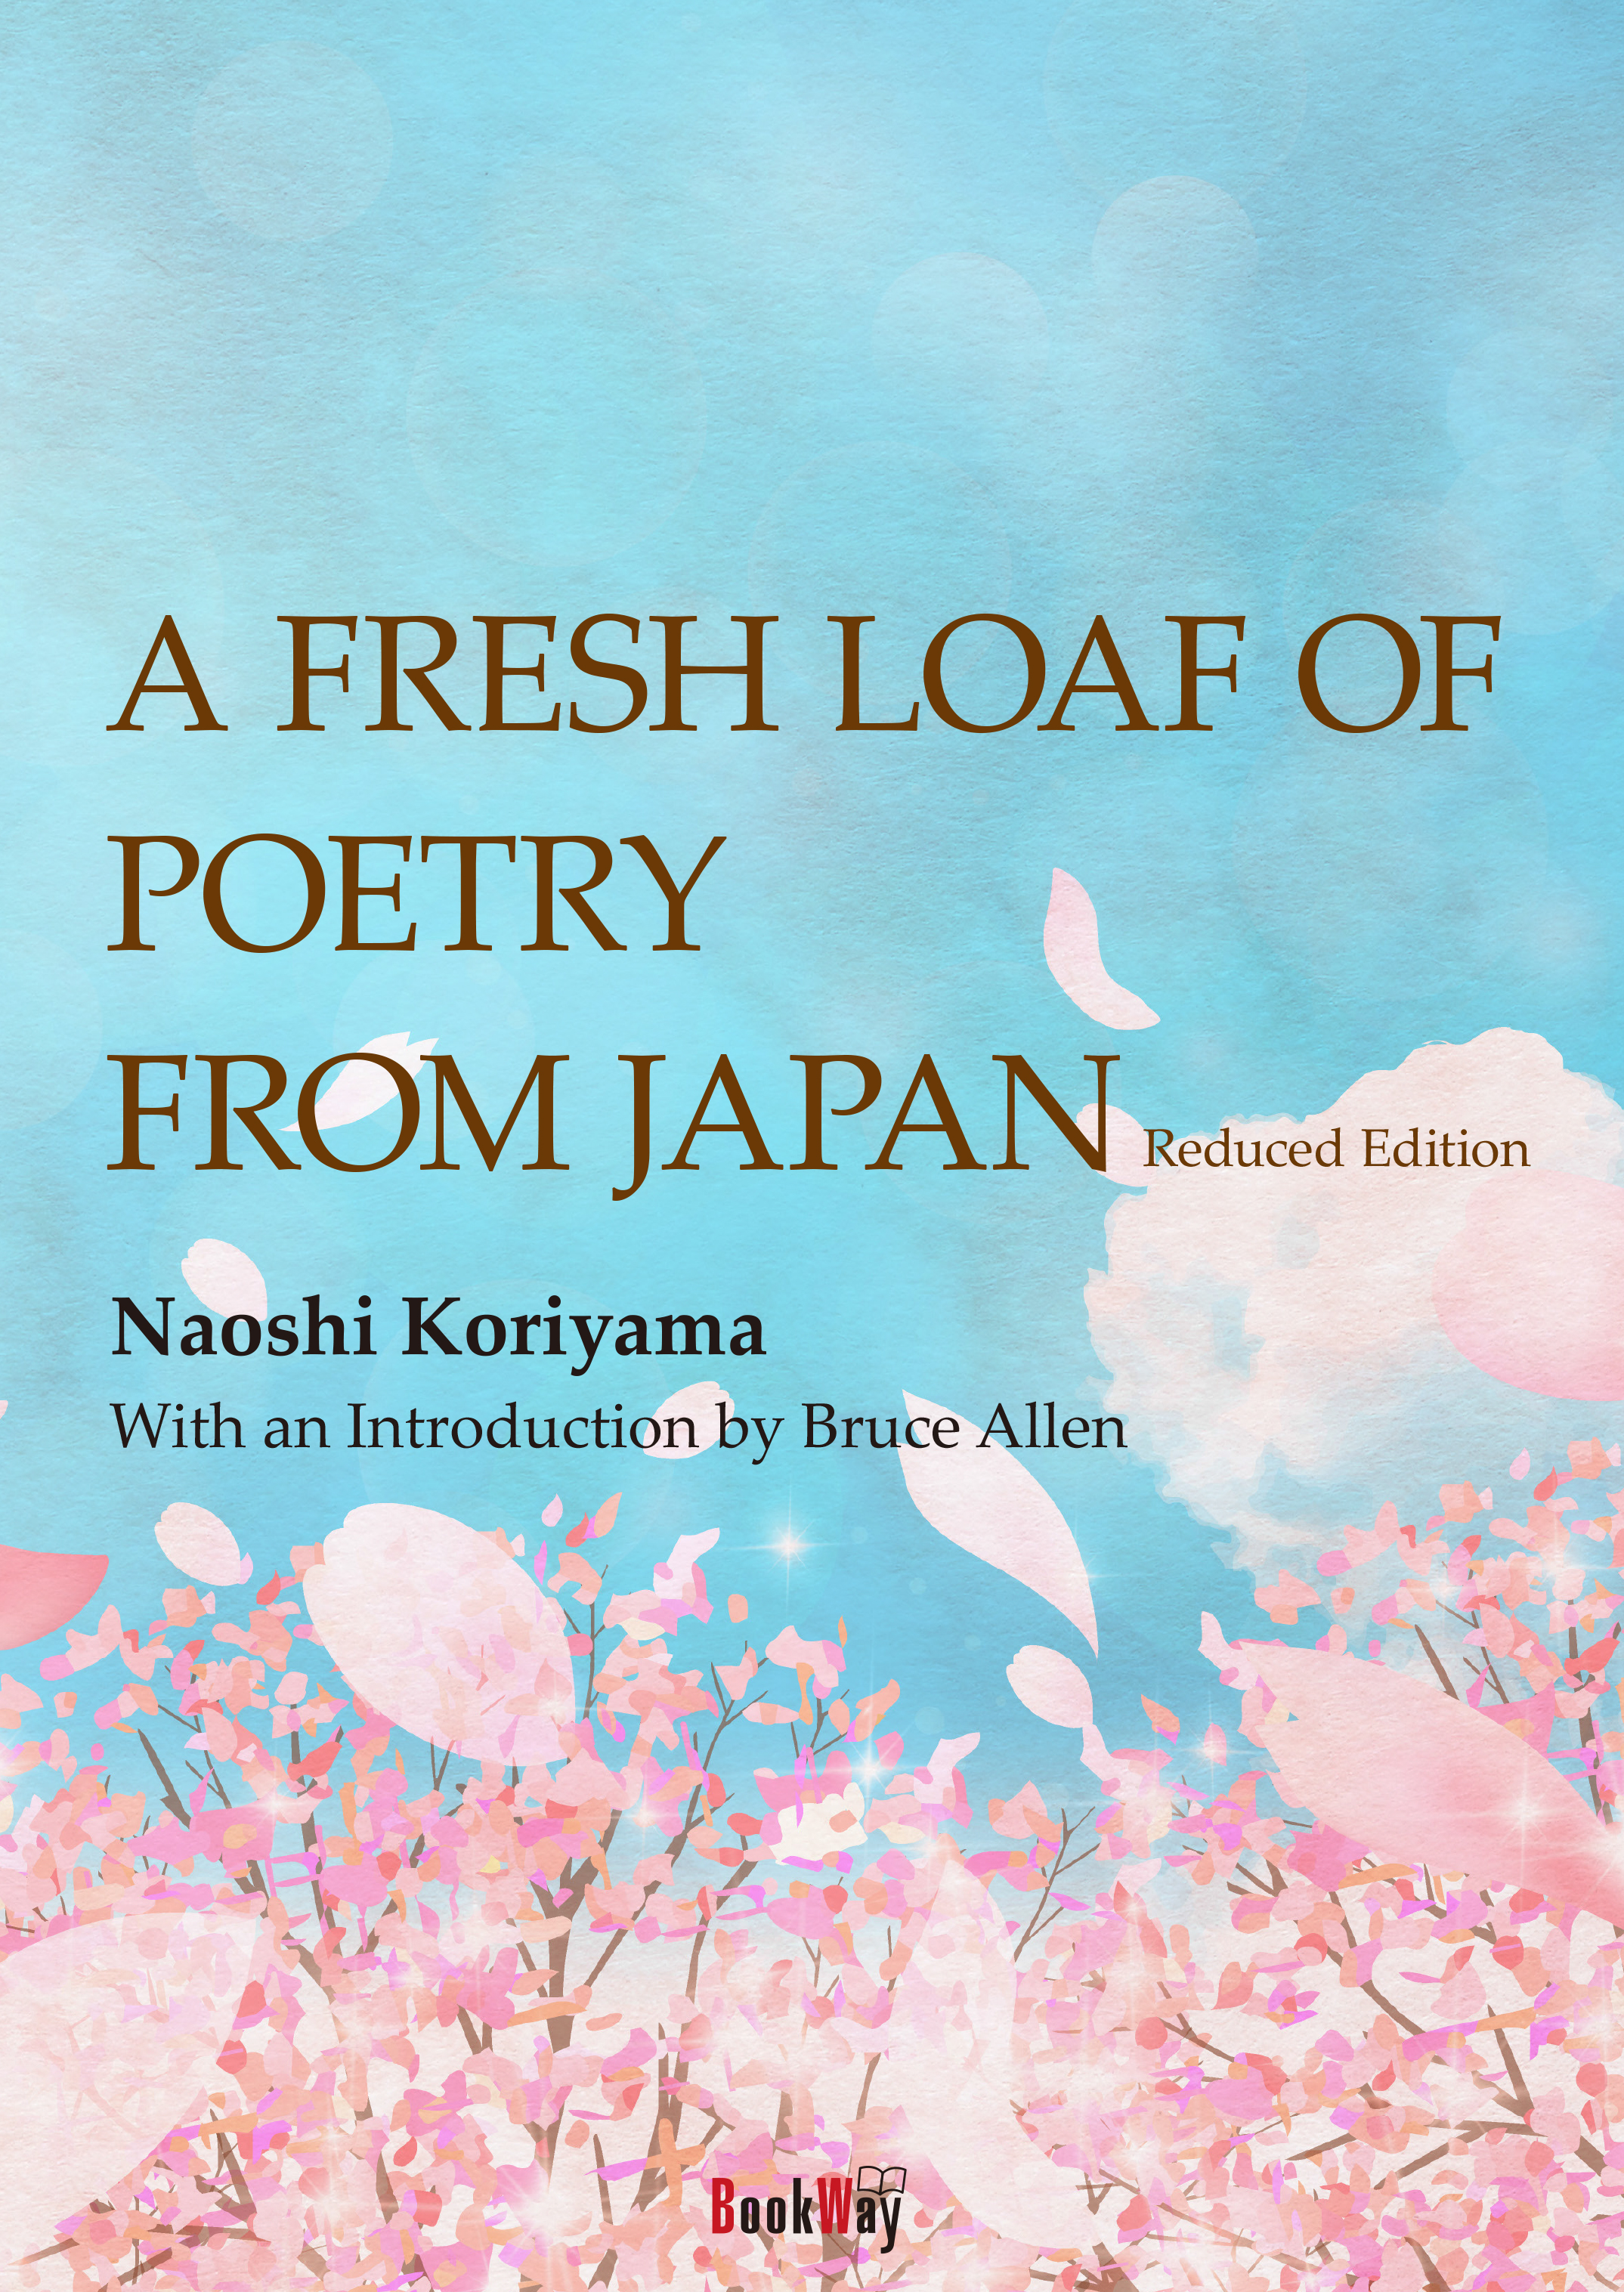 A Fresh Loaf of Poetry from Japan（Reduced Edition）の商品画像